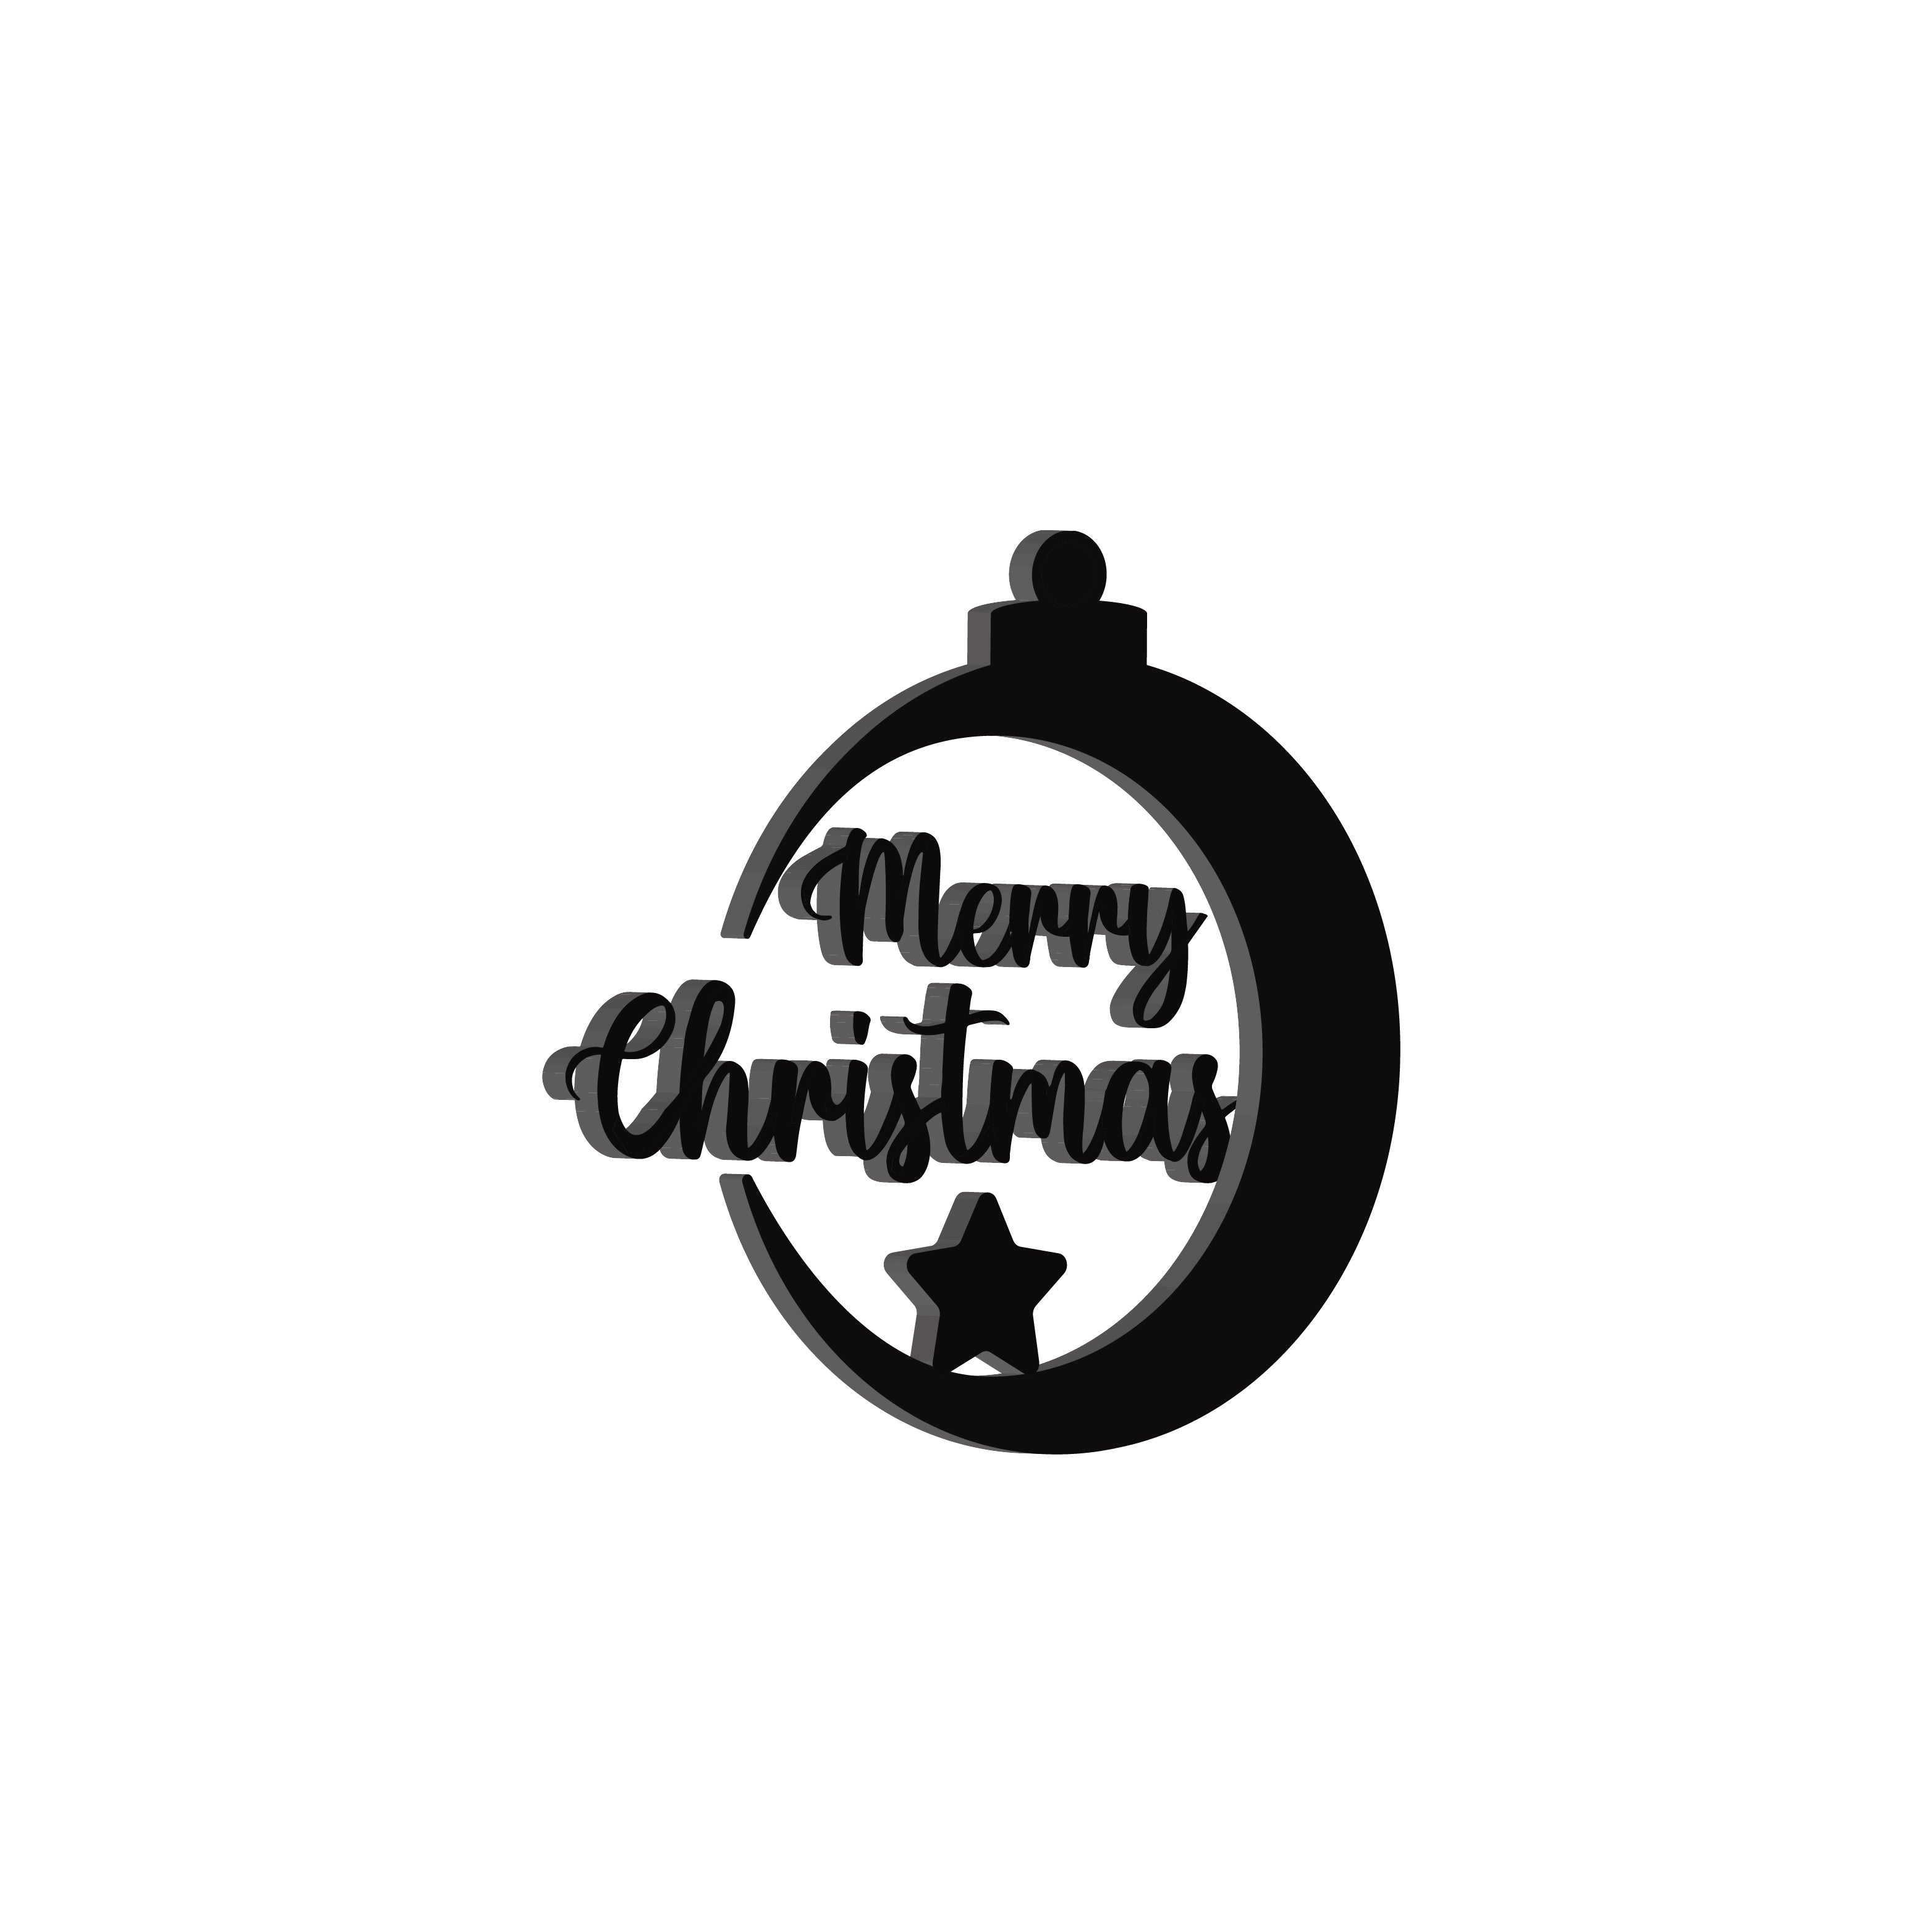 "Merry Christmas Bell" Black Engineered Wood Wall Art Cutout, Ready to Hang Home Decor 4